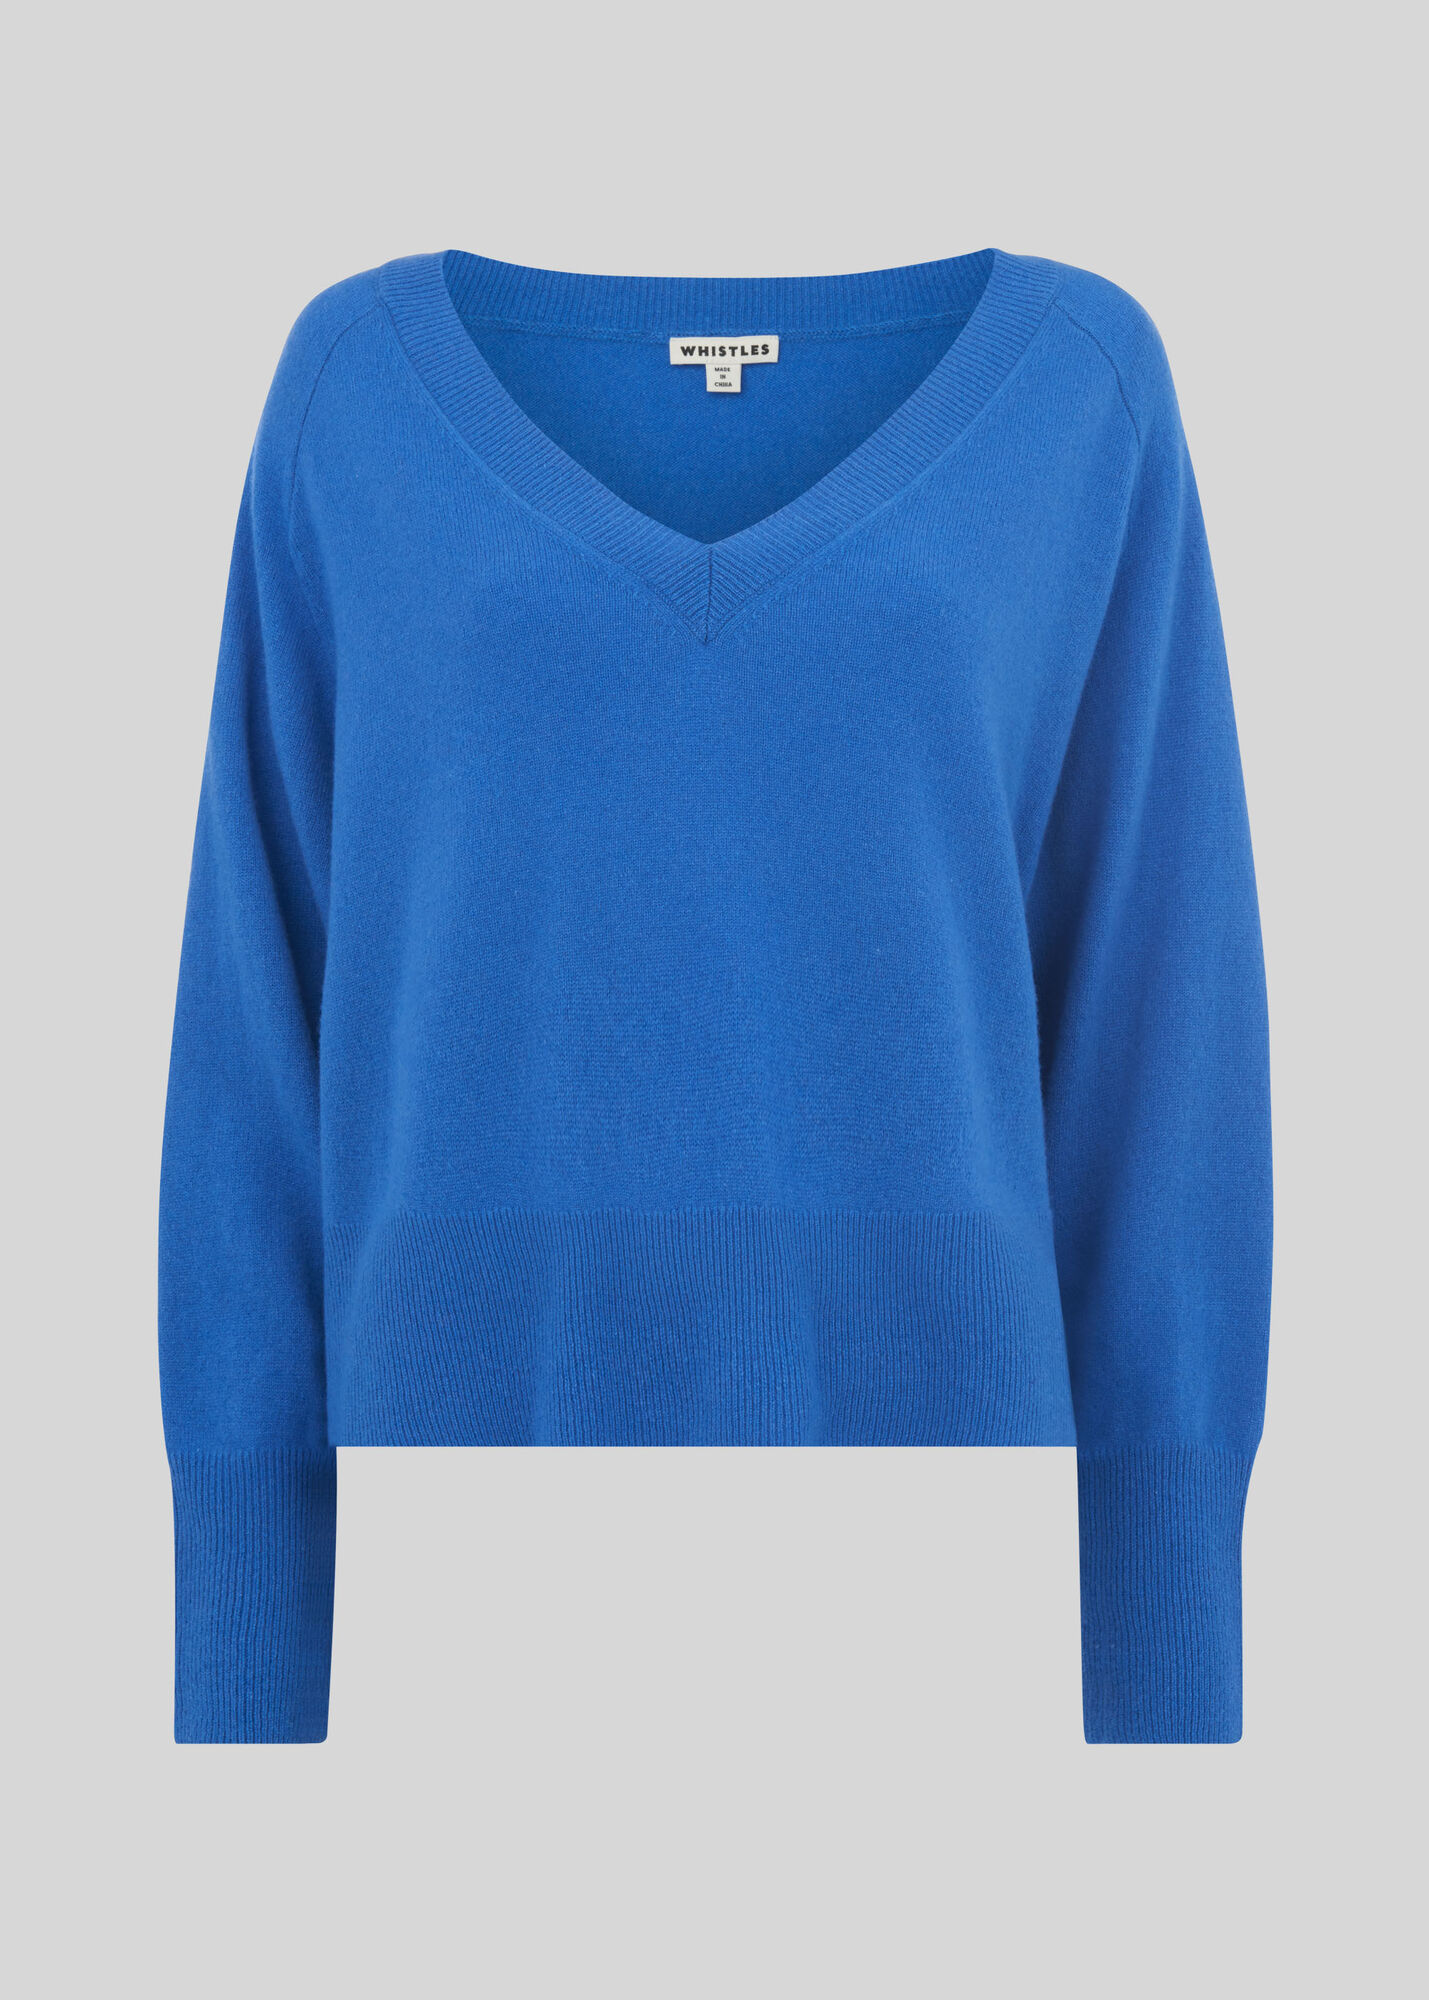 Blue Sustainable Cashmere Jumper | WHISTLES